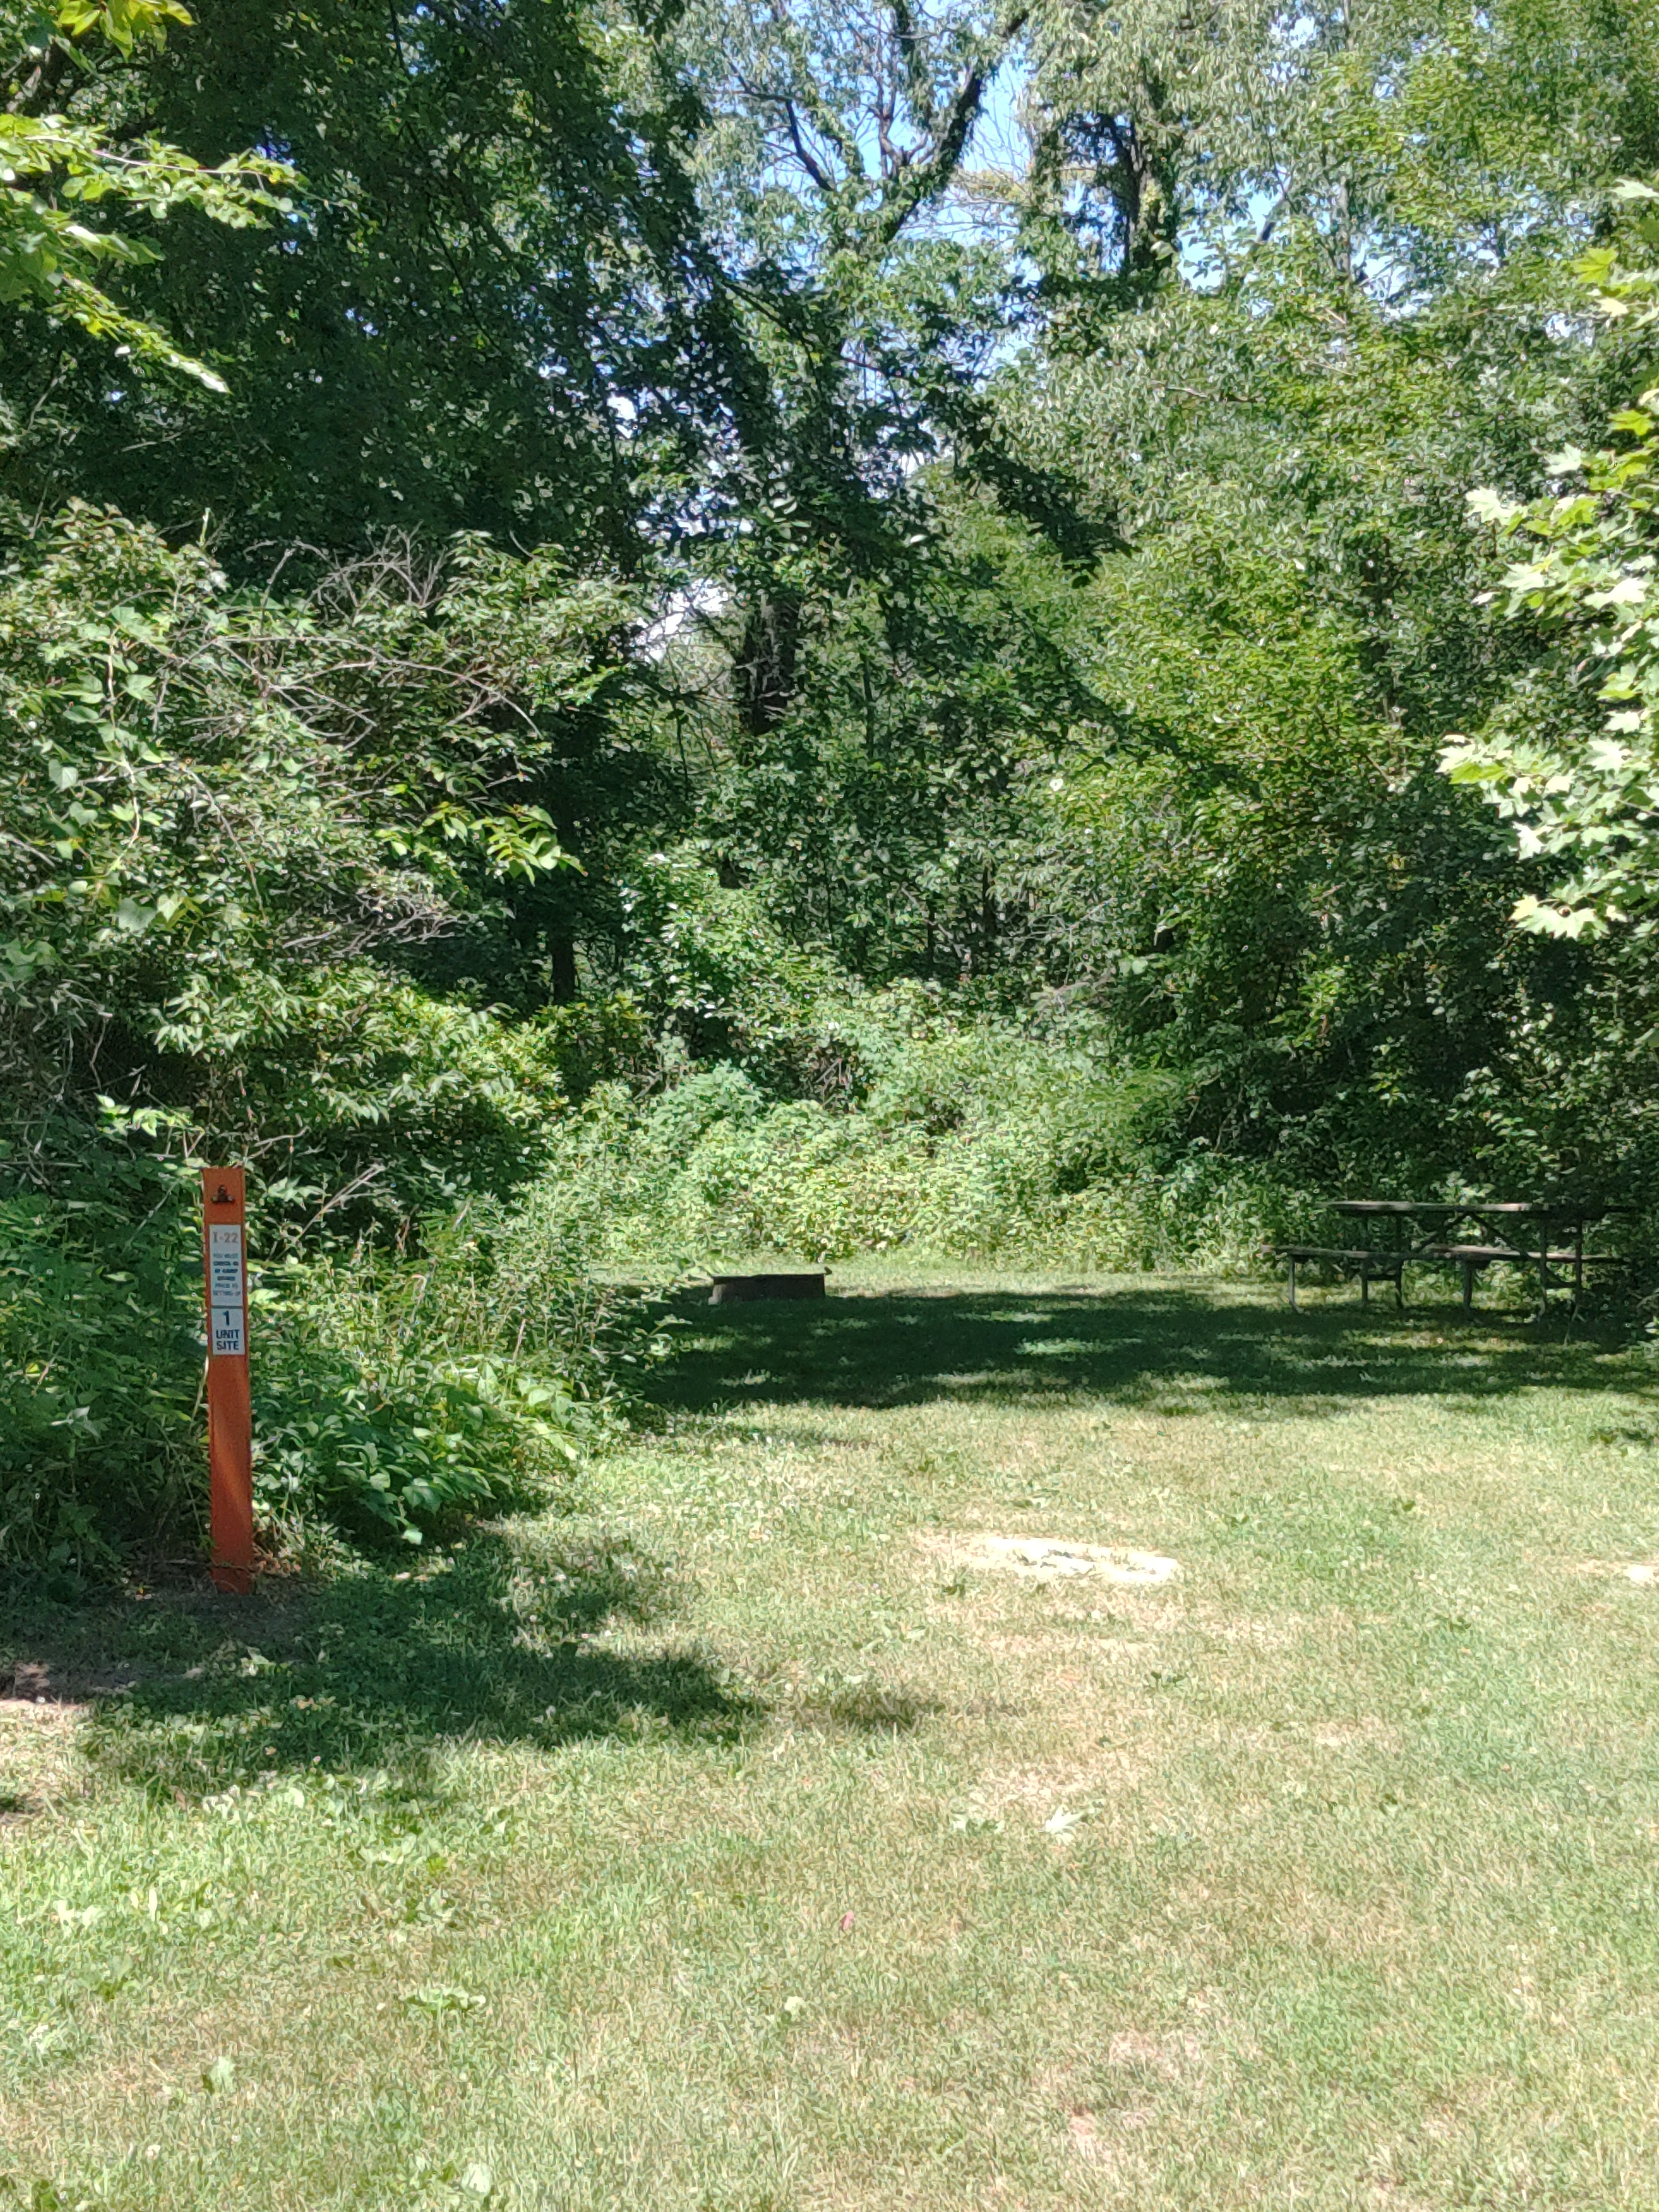 Camper submitted image from Indian Meadows Campground - Loud Thunder Forest Preserve - 1